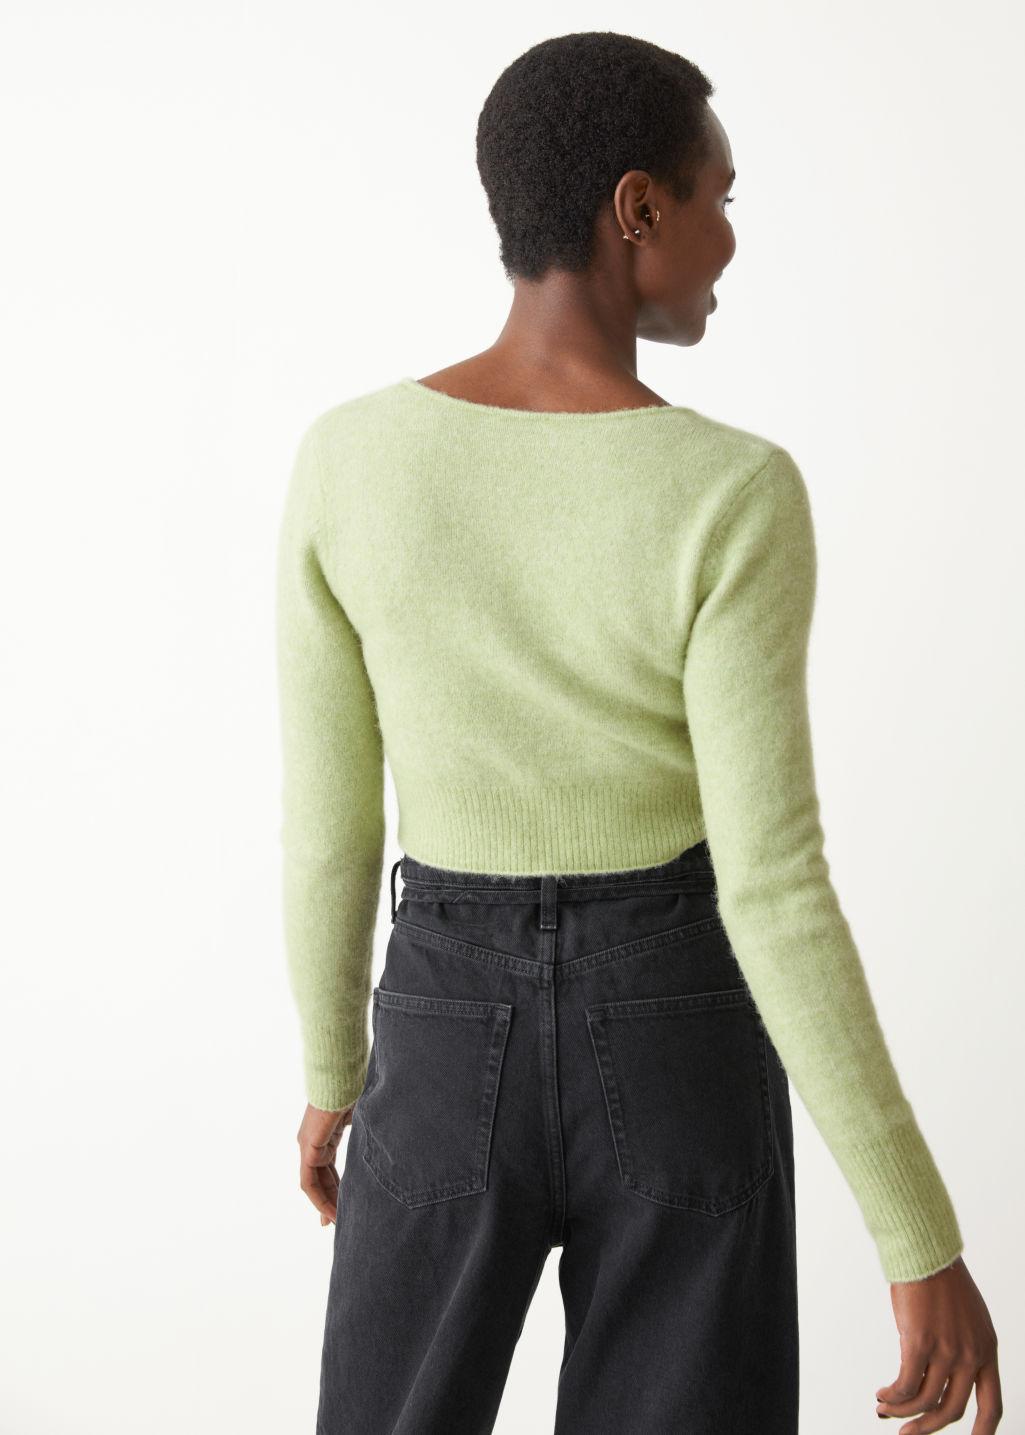 & Other Stories Cropped Knit Cardigan in Green | Lyst